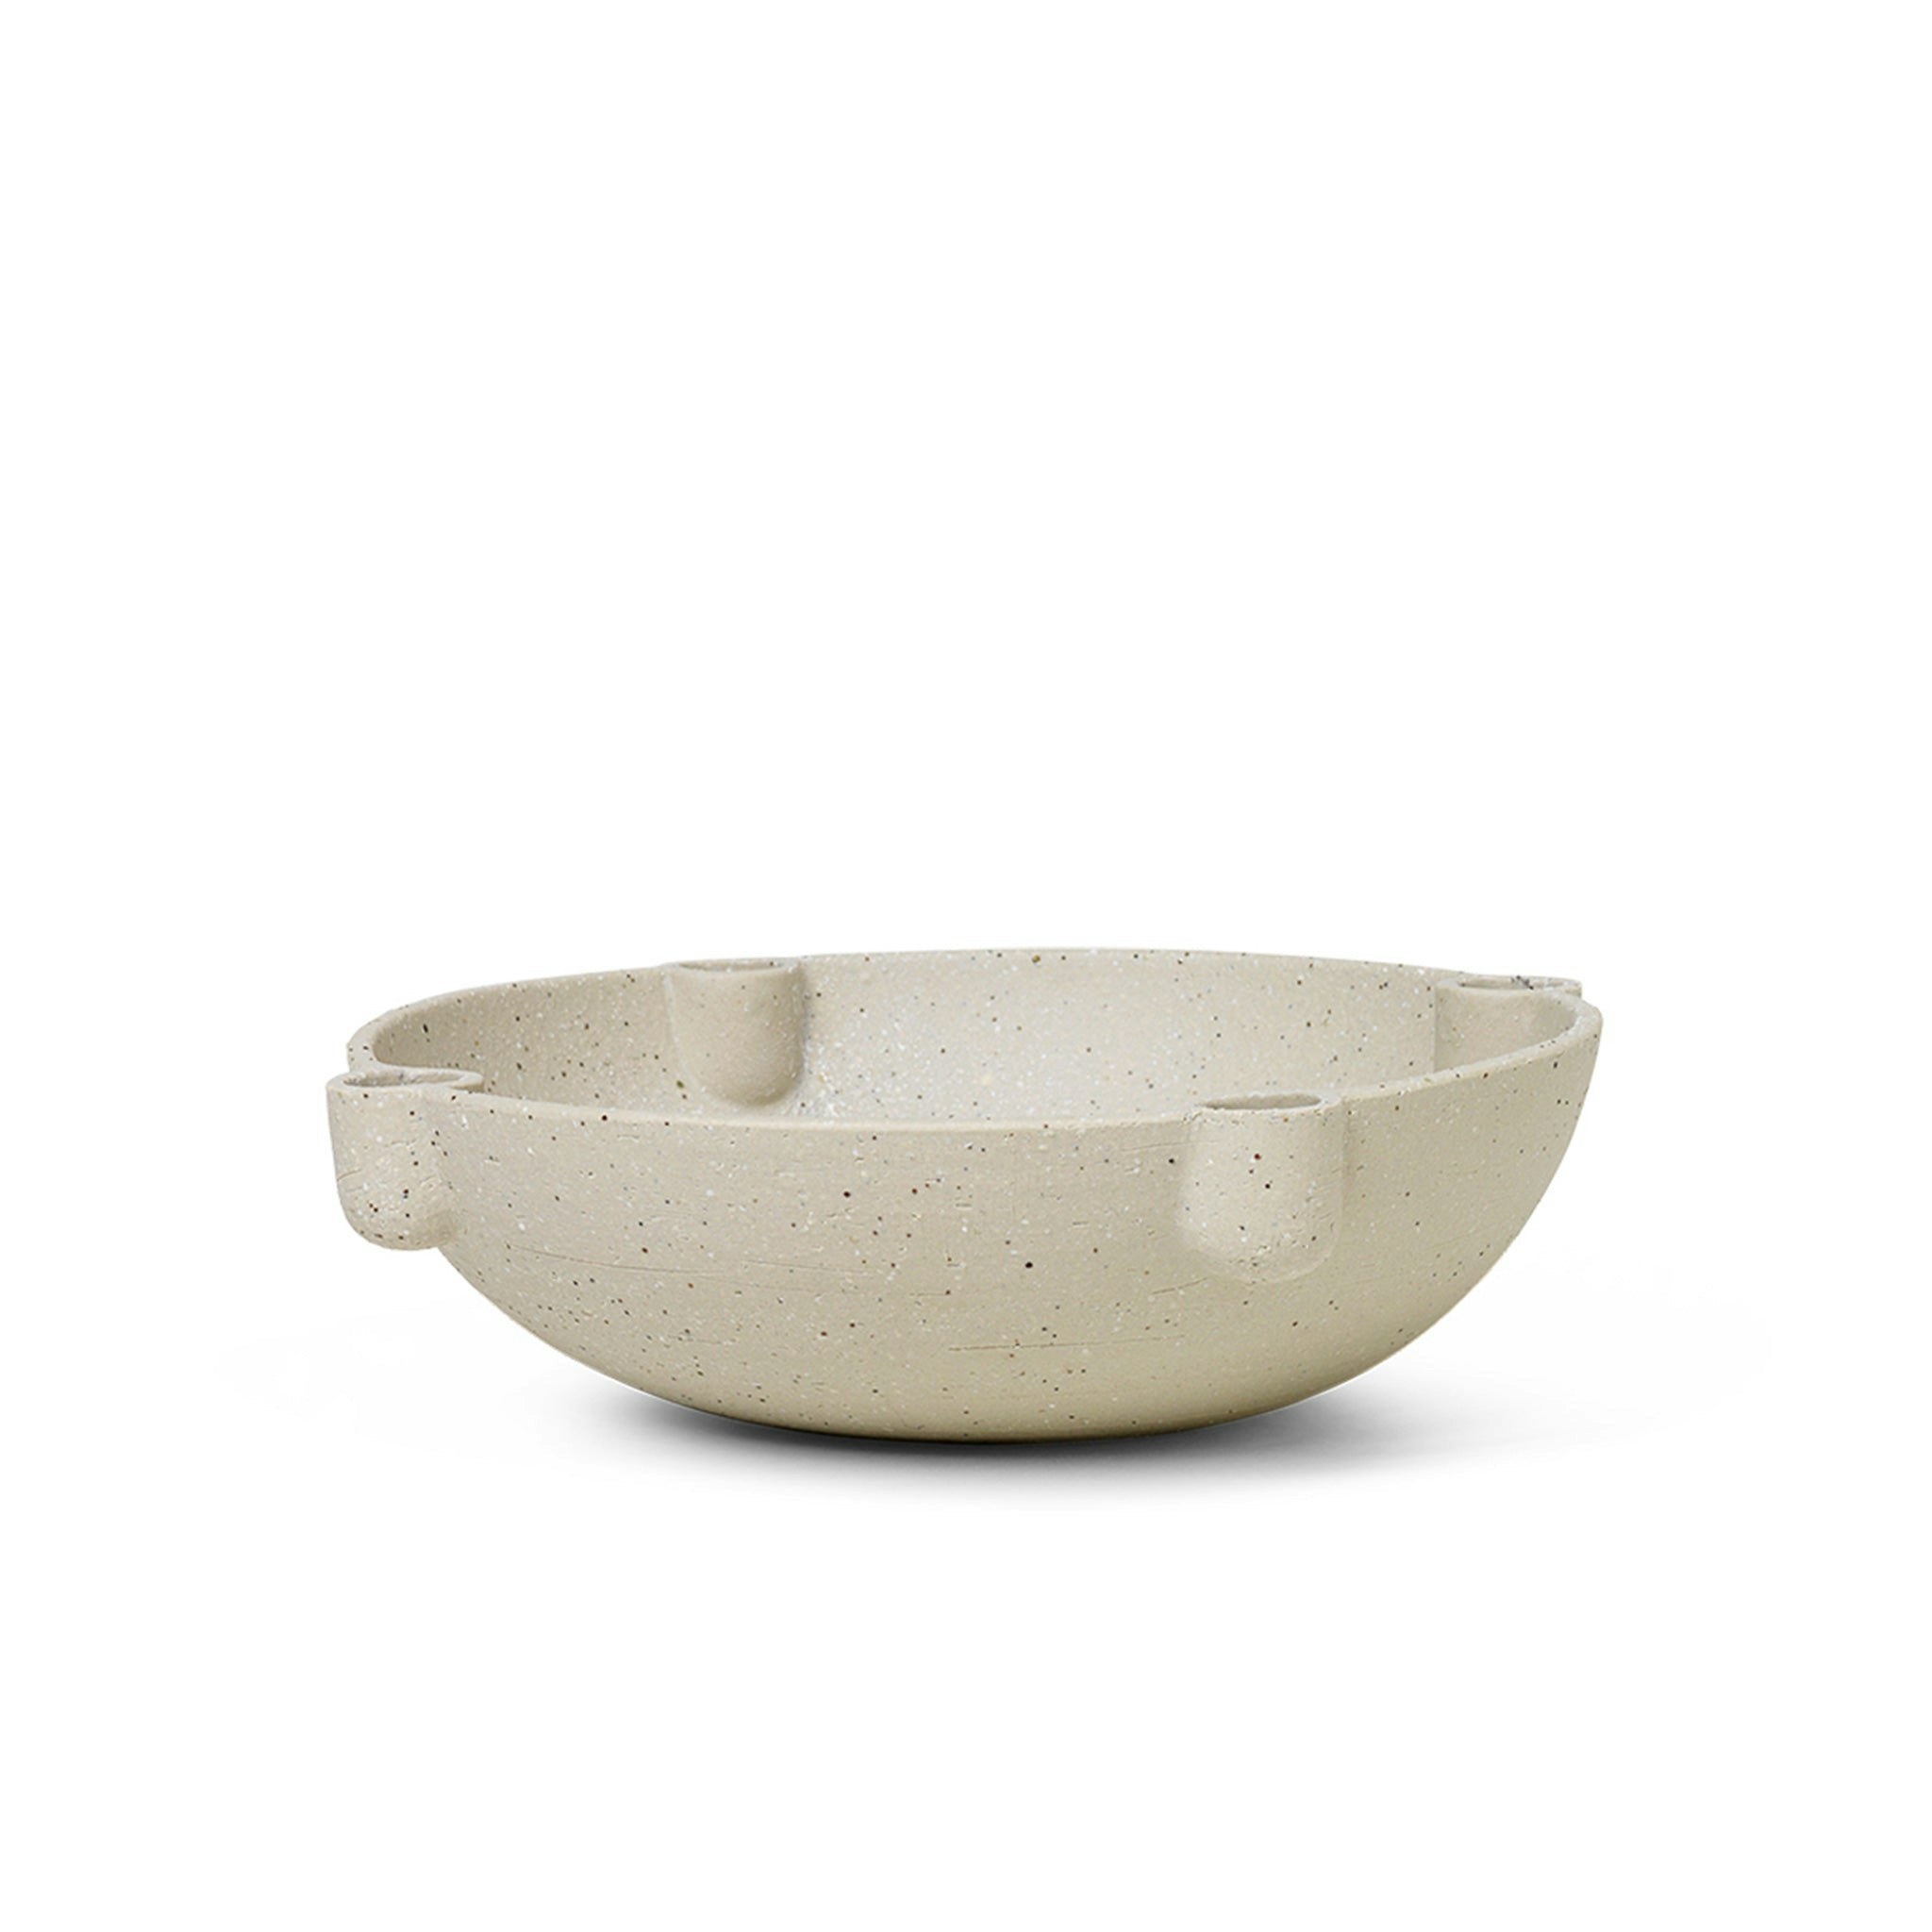 Bowl Candle Holder - Large Ceramic by Ferm Living